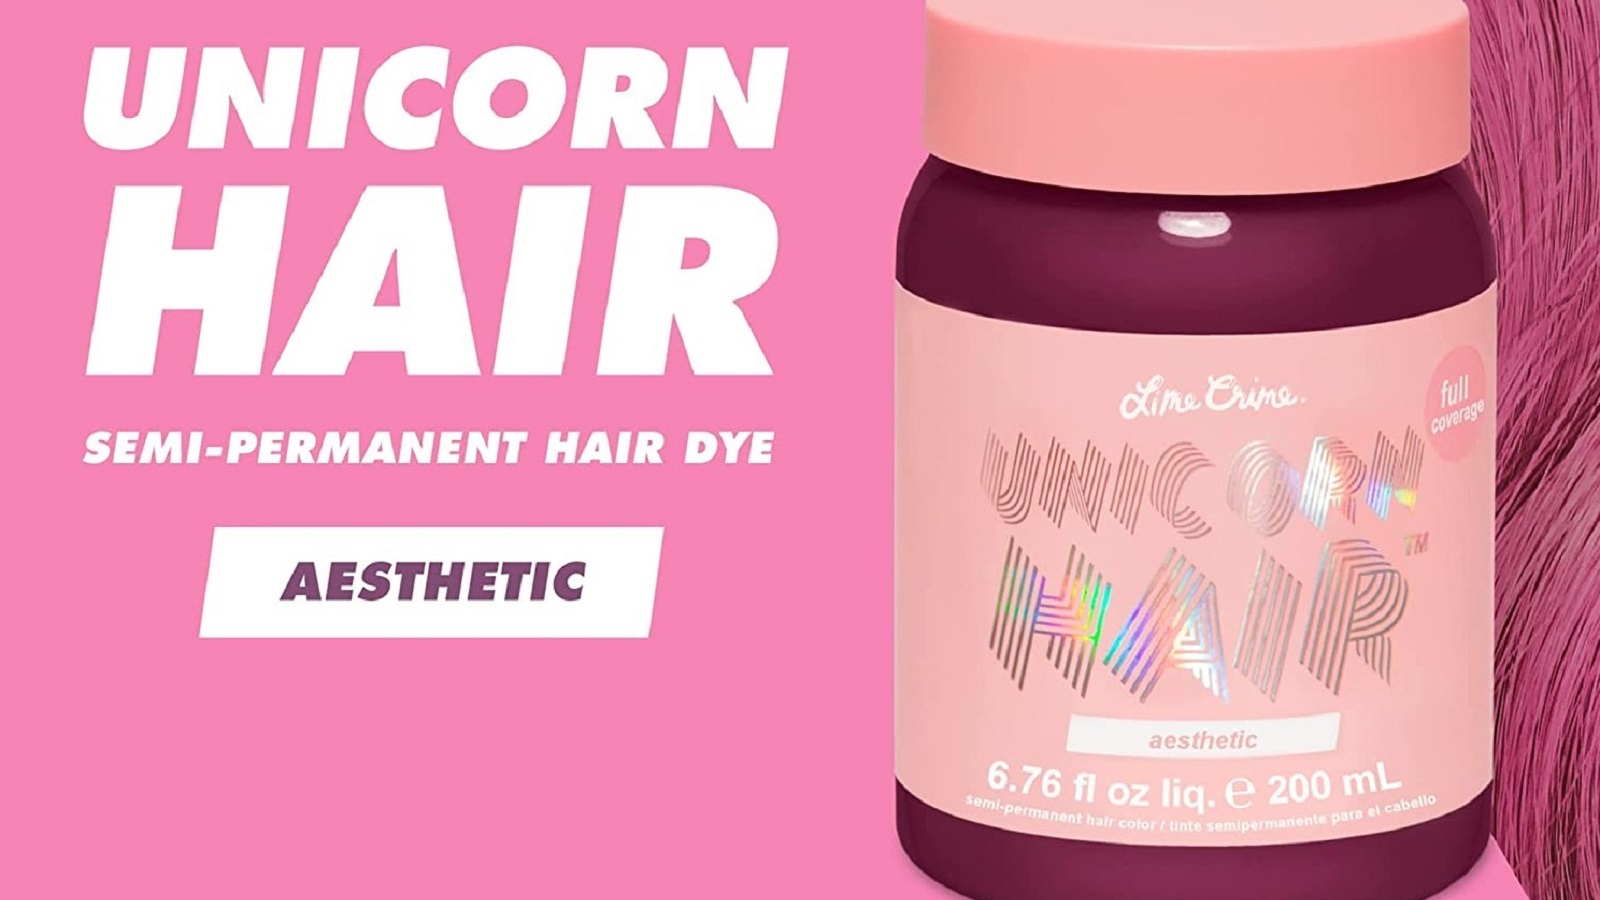 Lime Crime Unicorn Hair Dye Review: *Pros and Cons* Is It Worth to Buy?